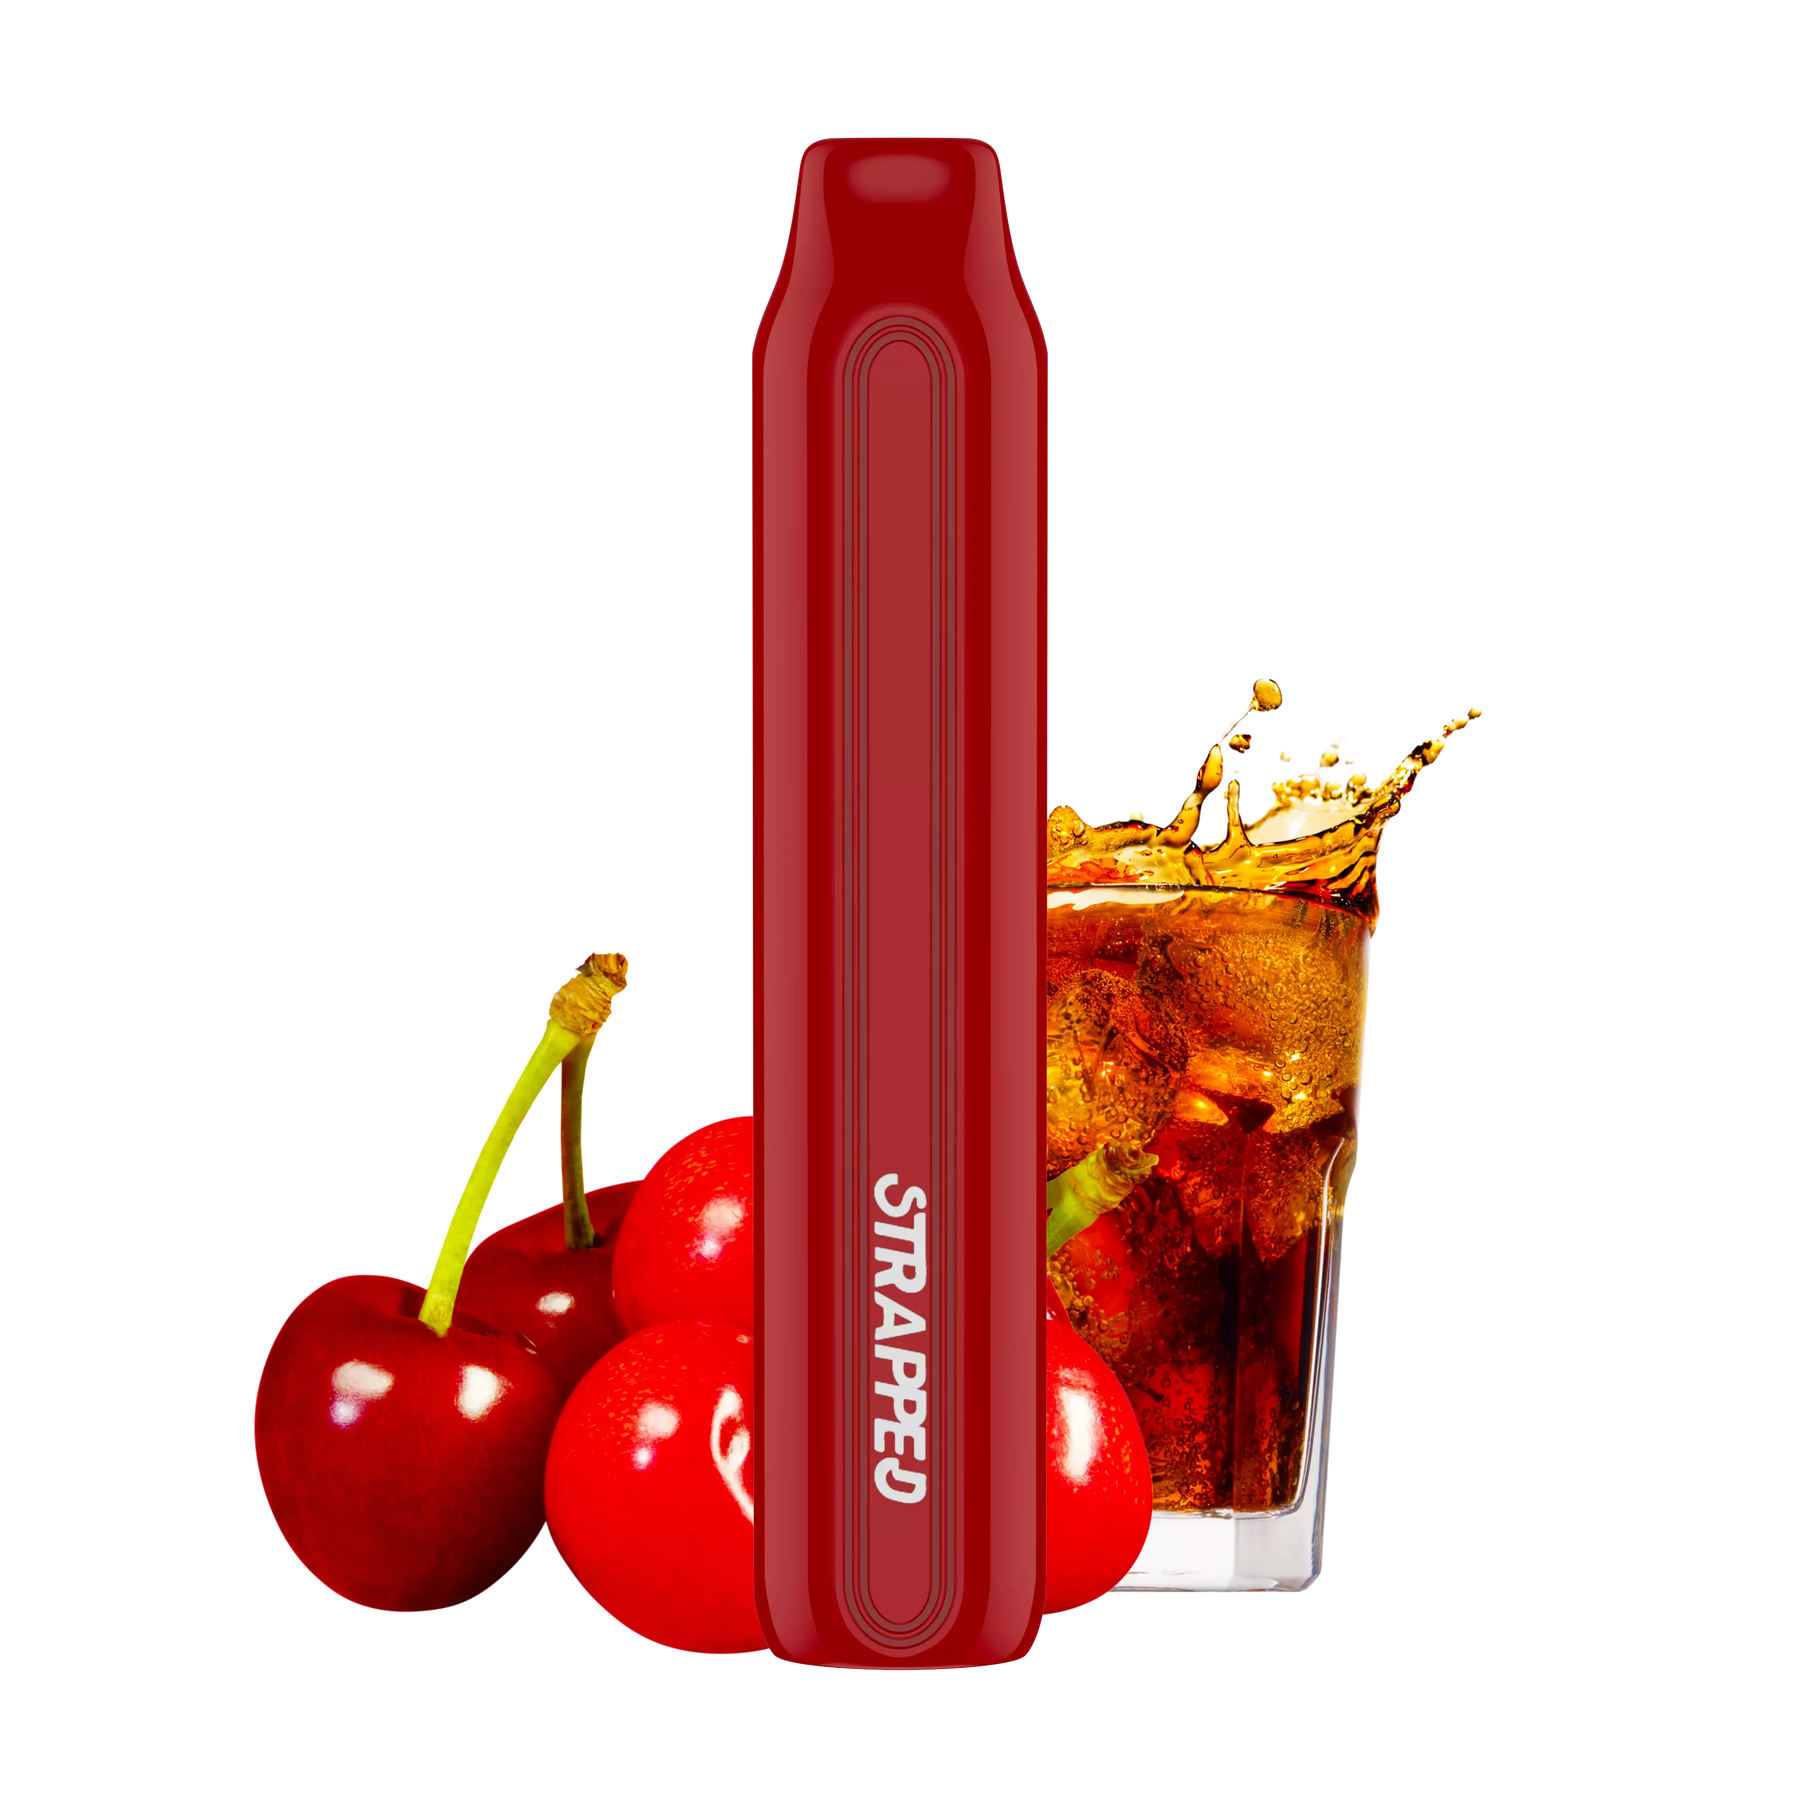 Strapped Stix Disposable Vaping Device | Cherry Cola